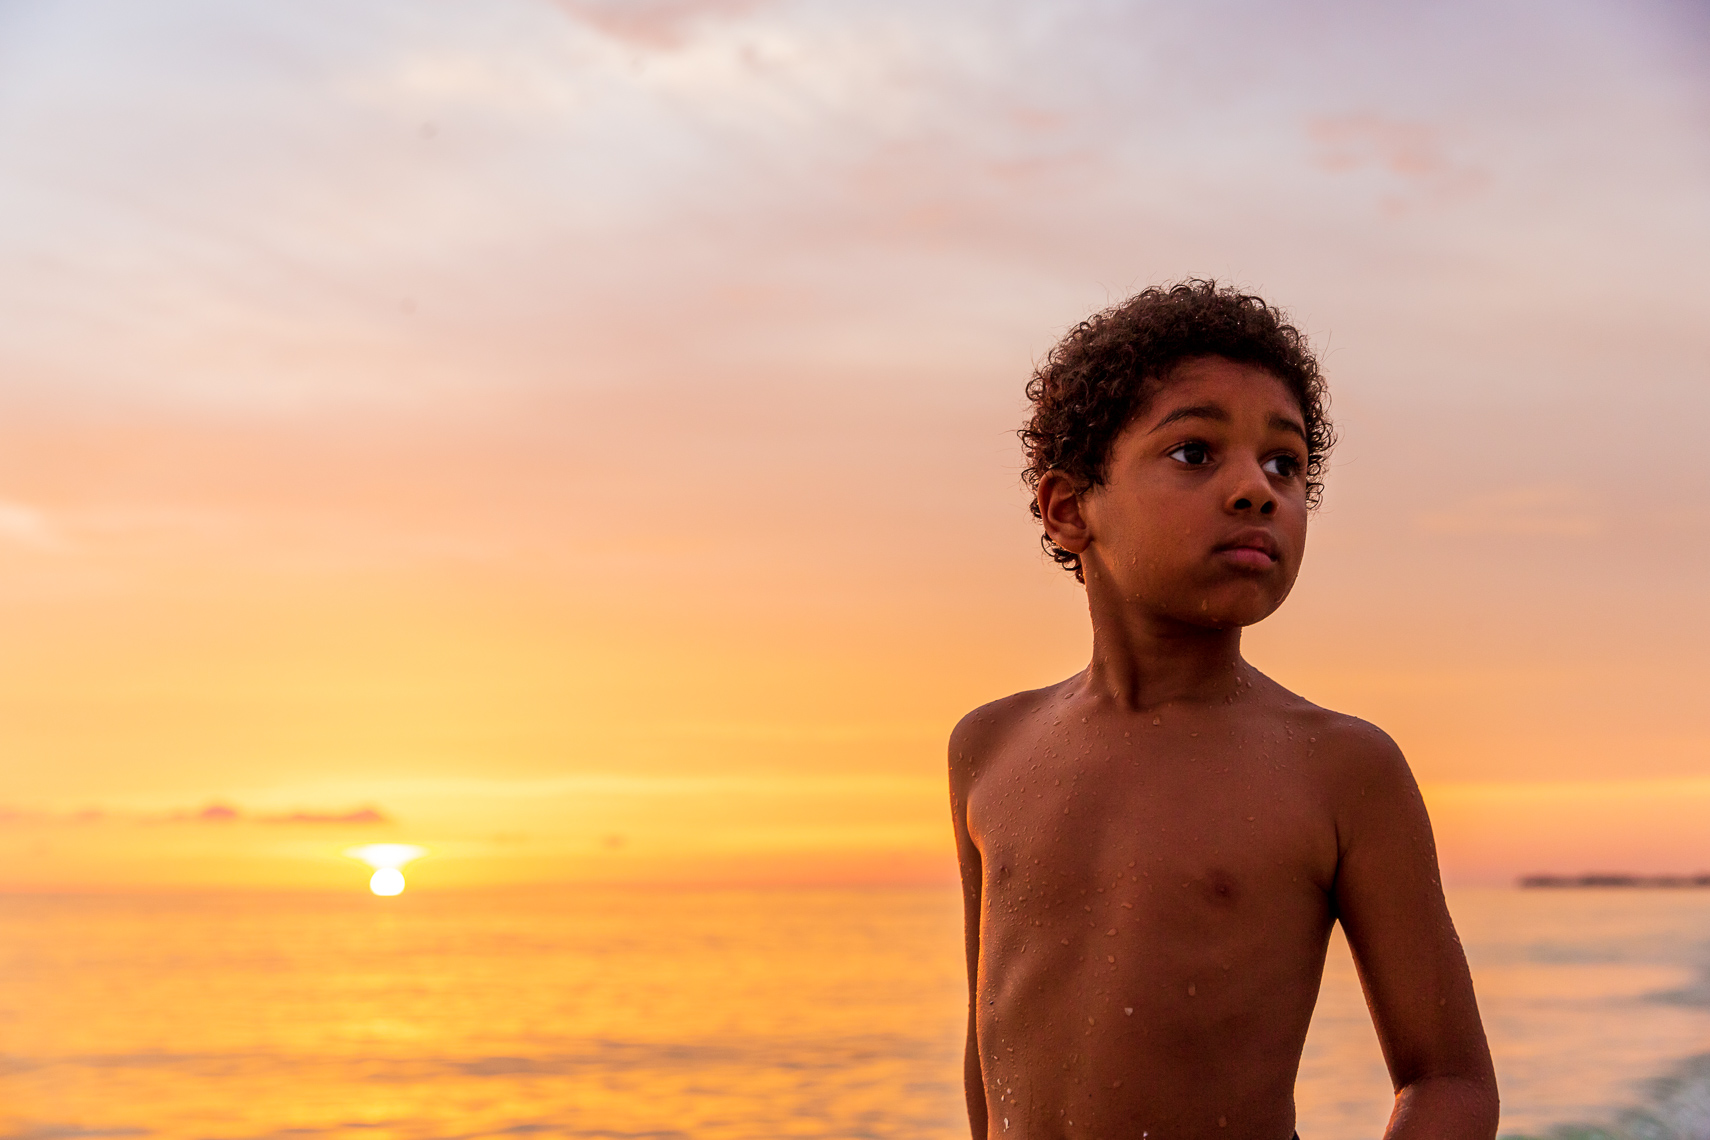 Children play in the Gulf of Mexico at sunset